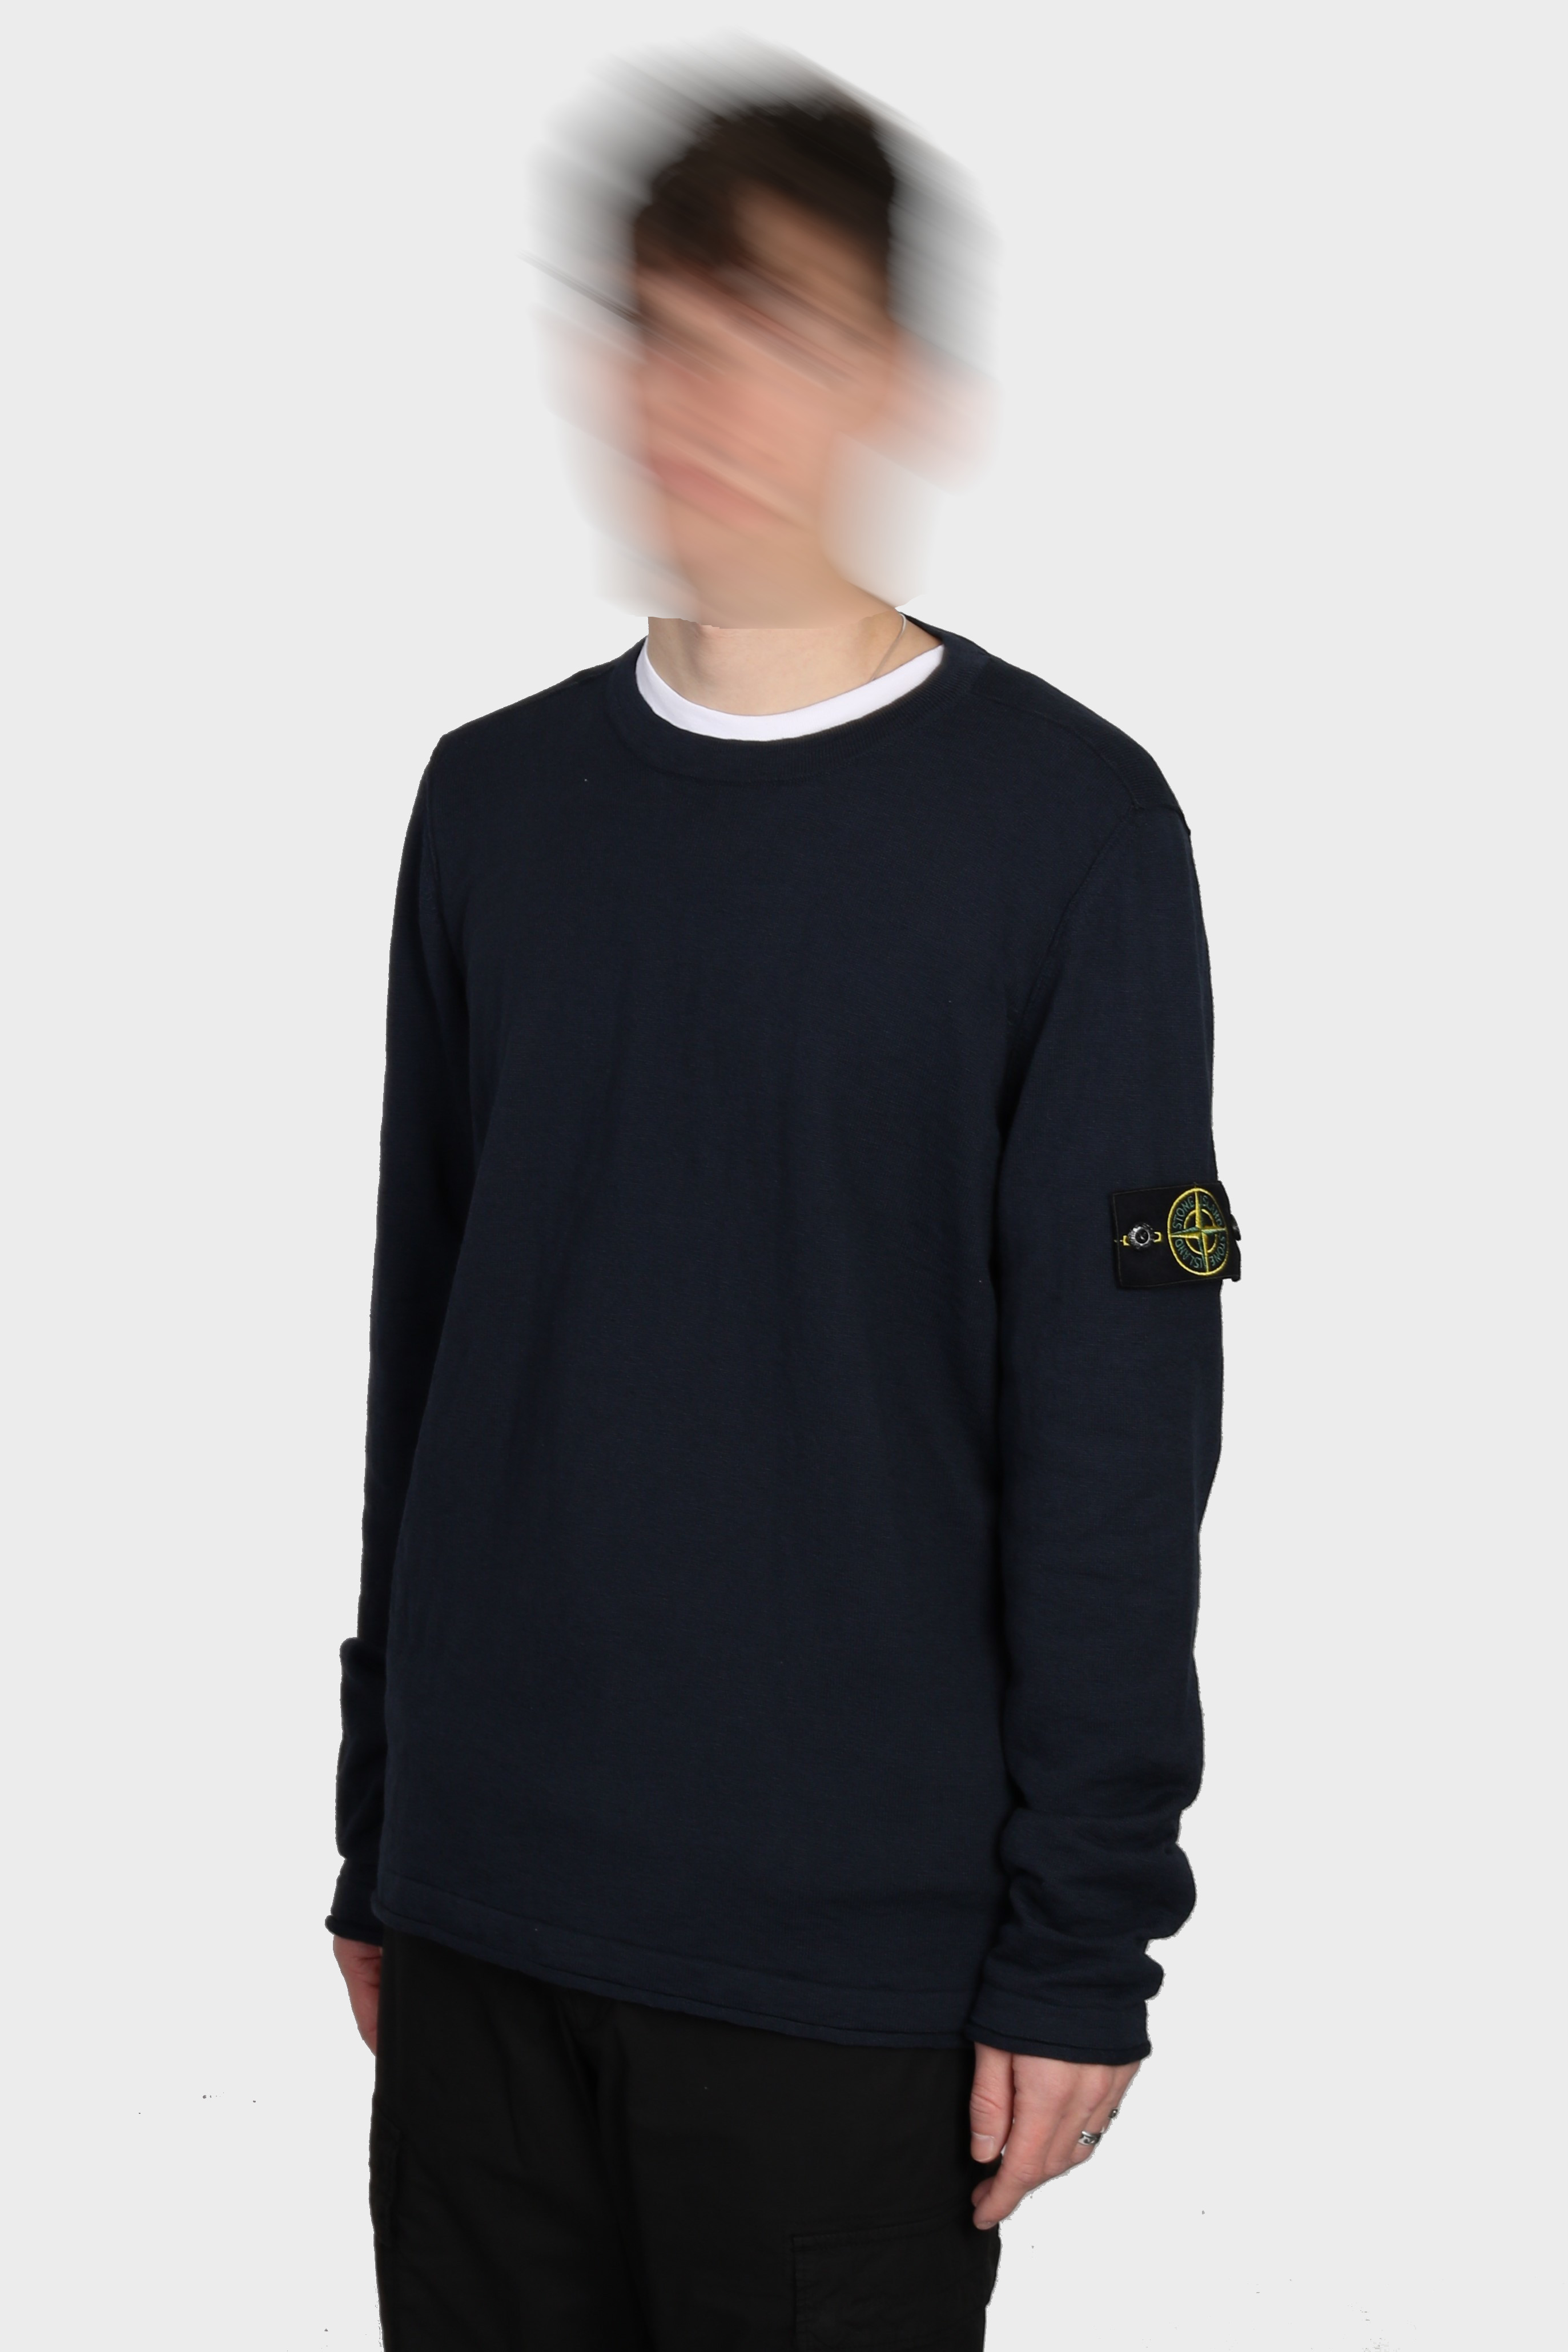 STONE ISLAND Summer Knit Pullover in Navy M